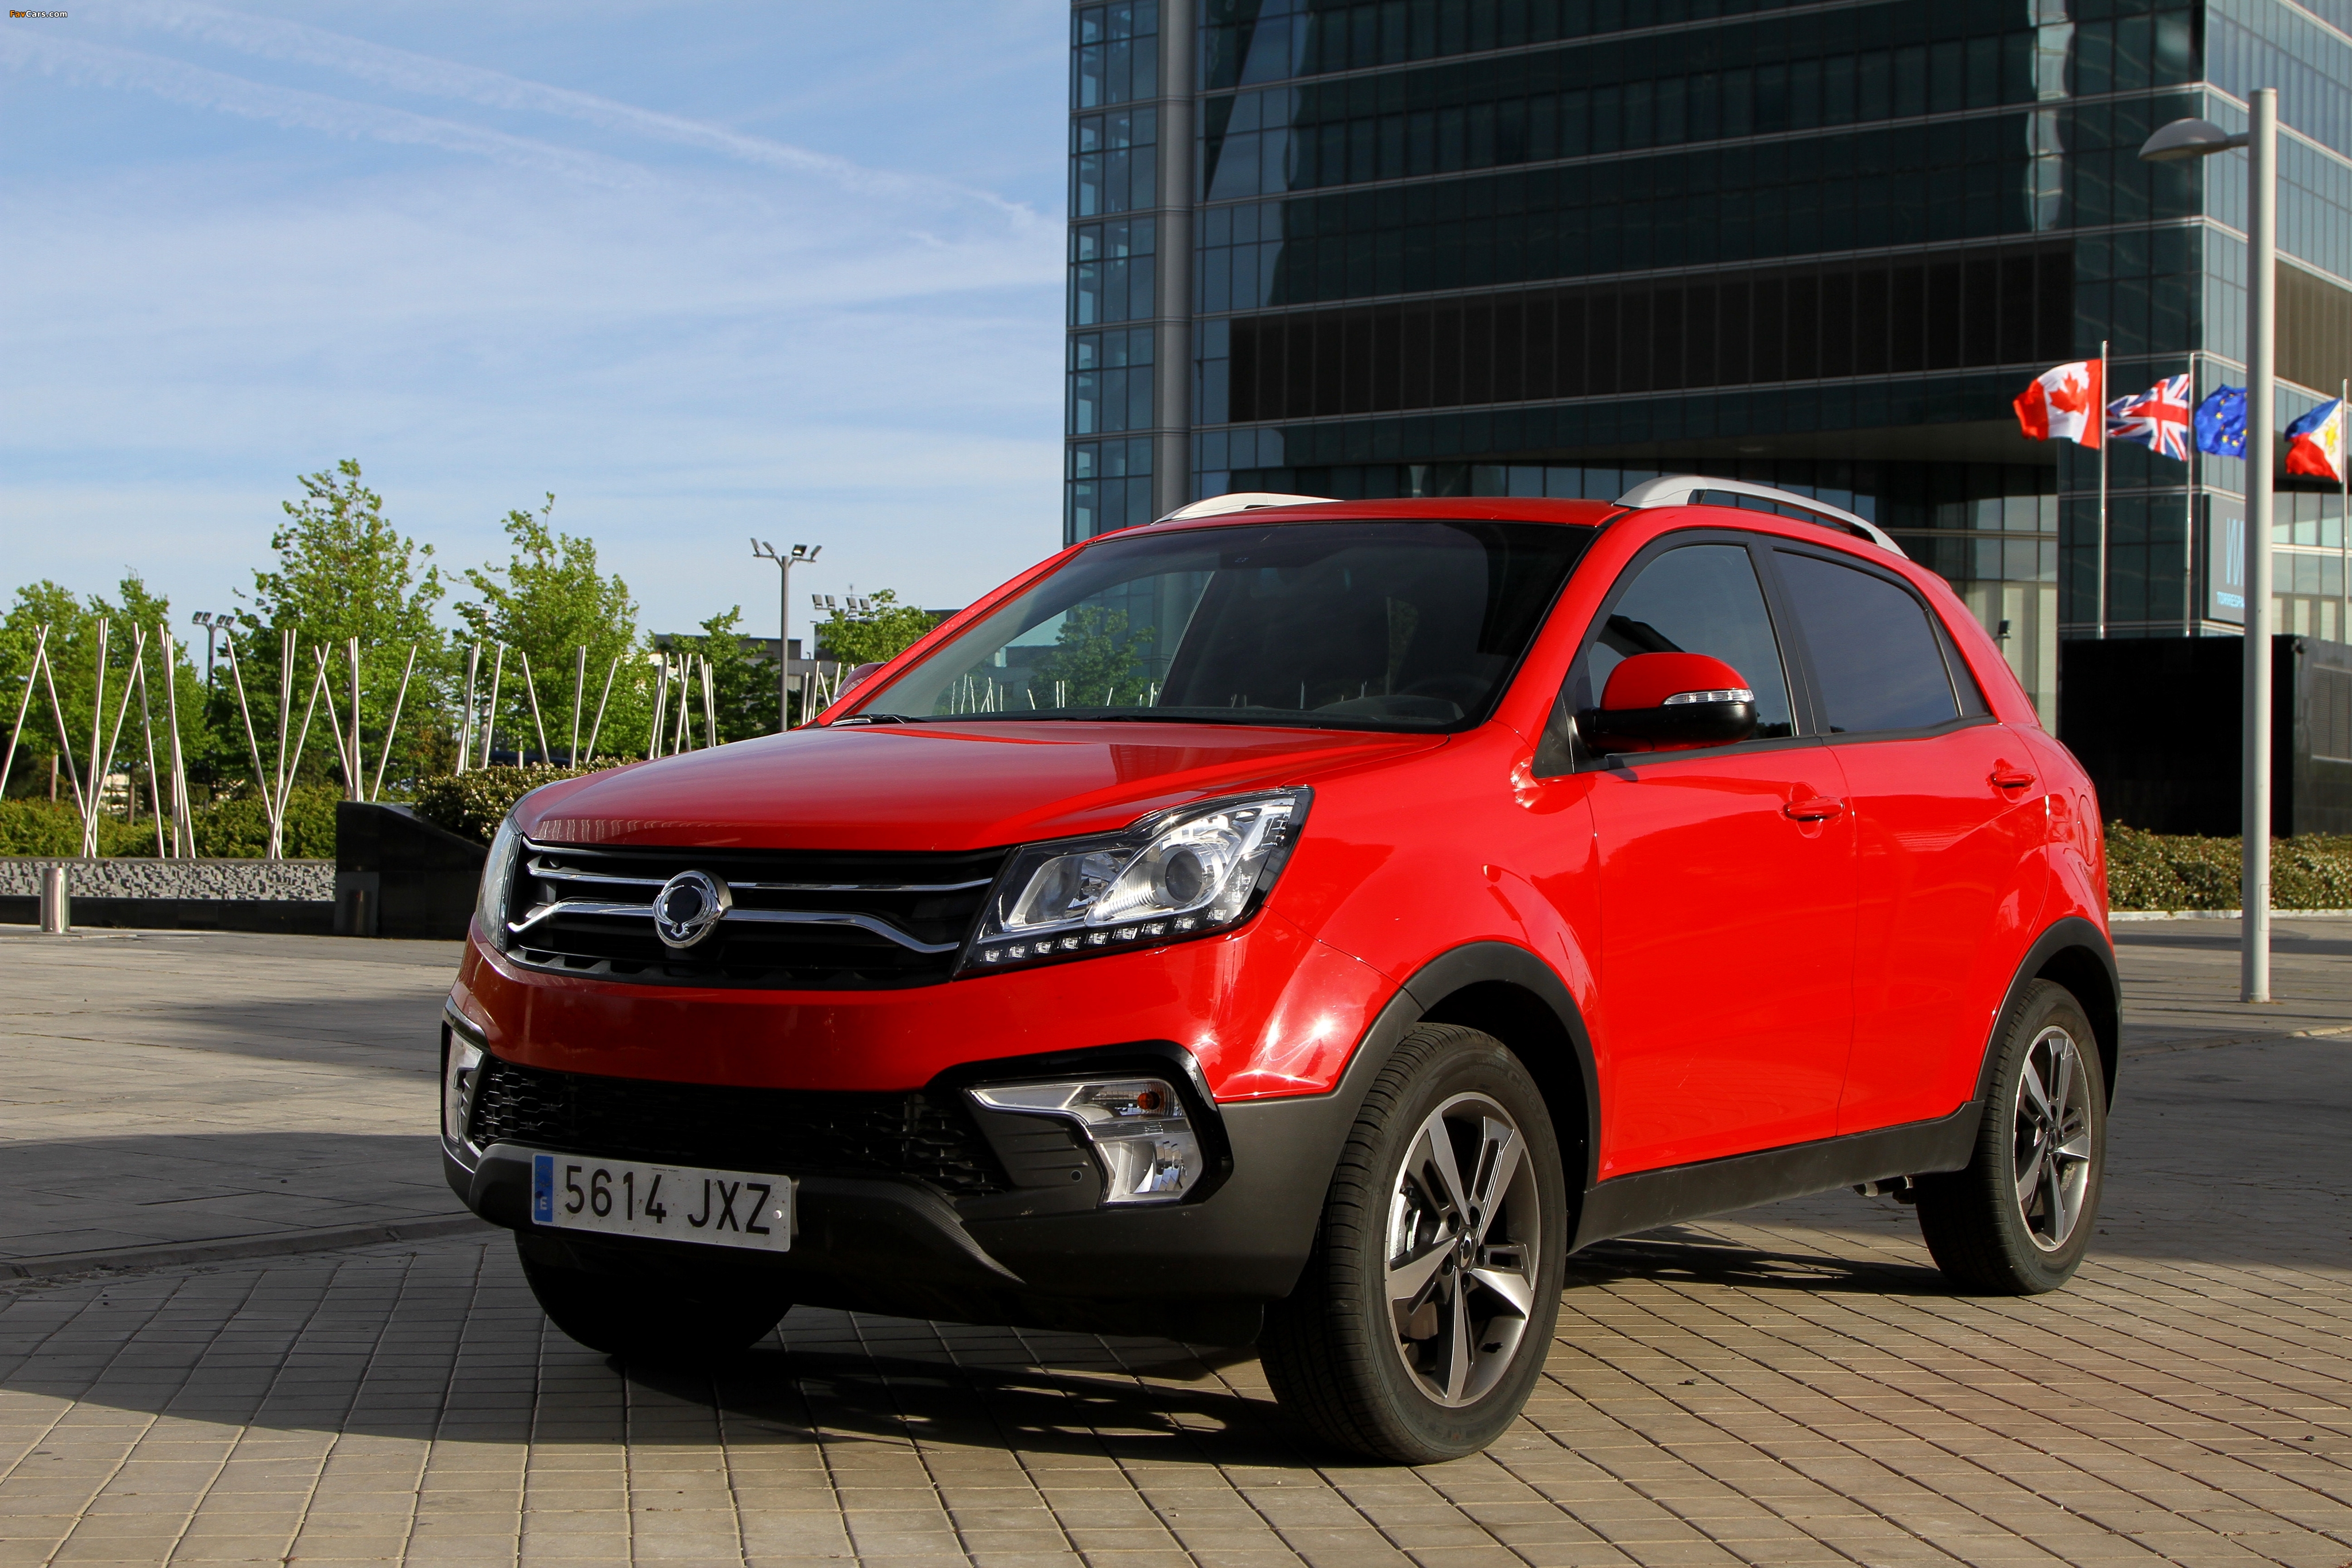 Pictures of SsangYong Korando 2017 (4096x2731)